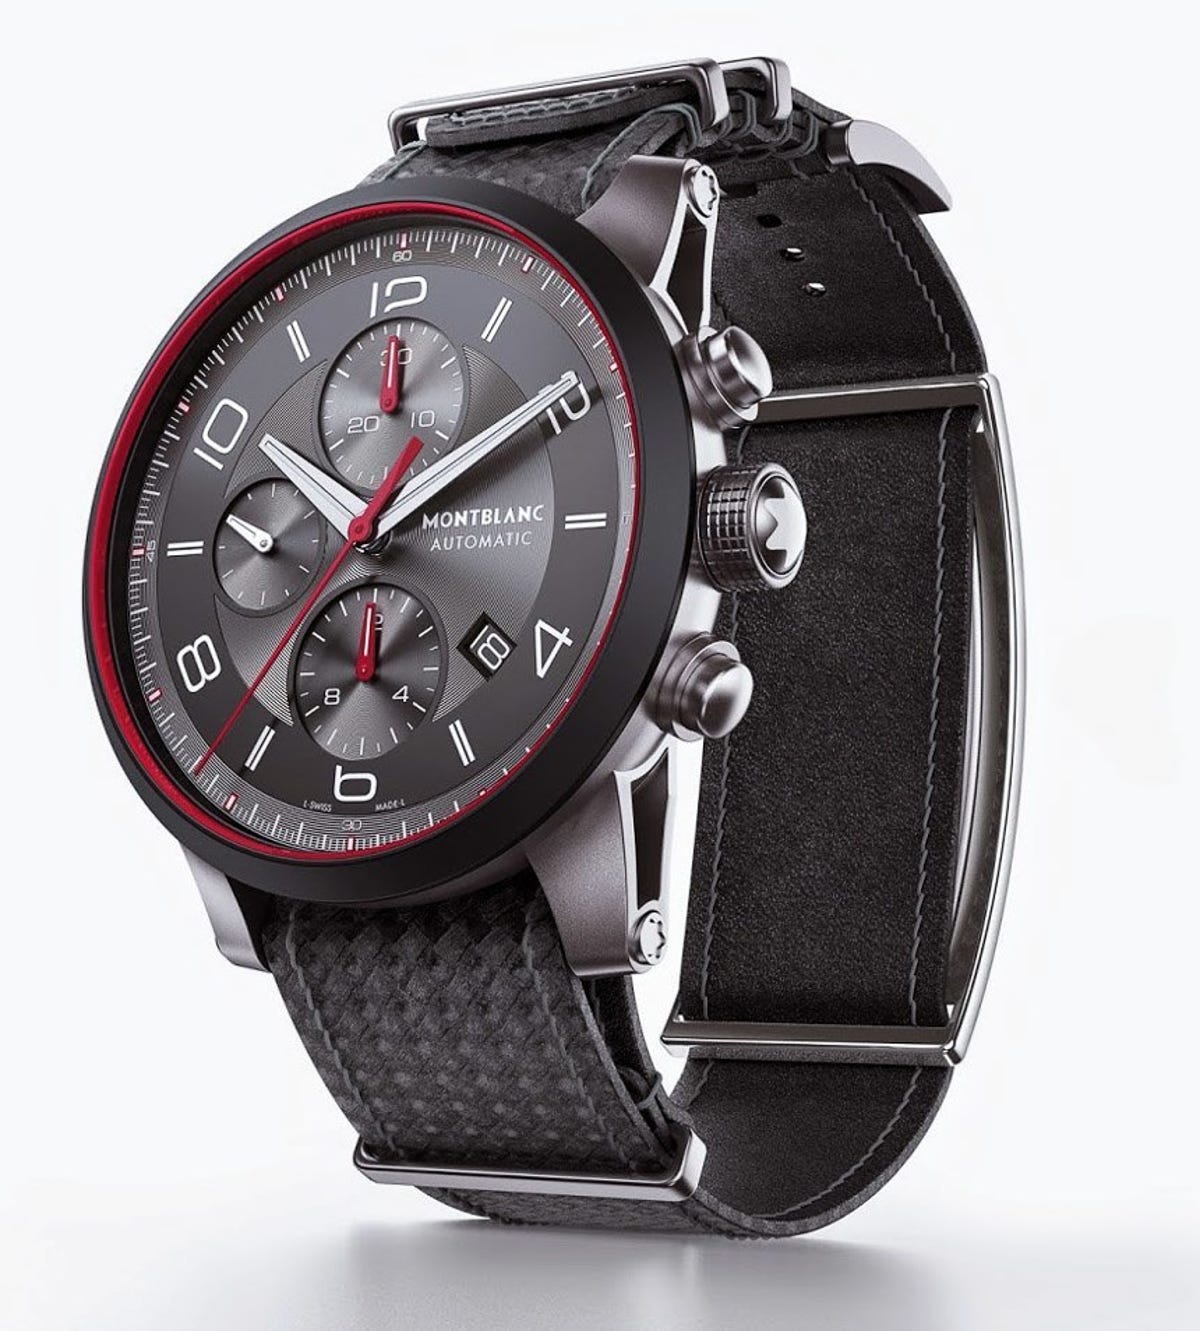 Montblanc Timewalker with e-strap